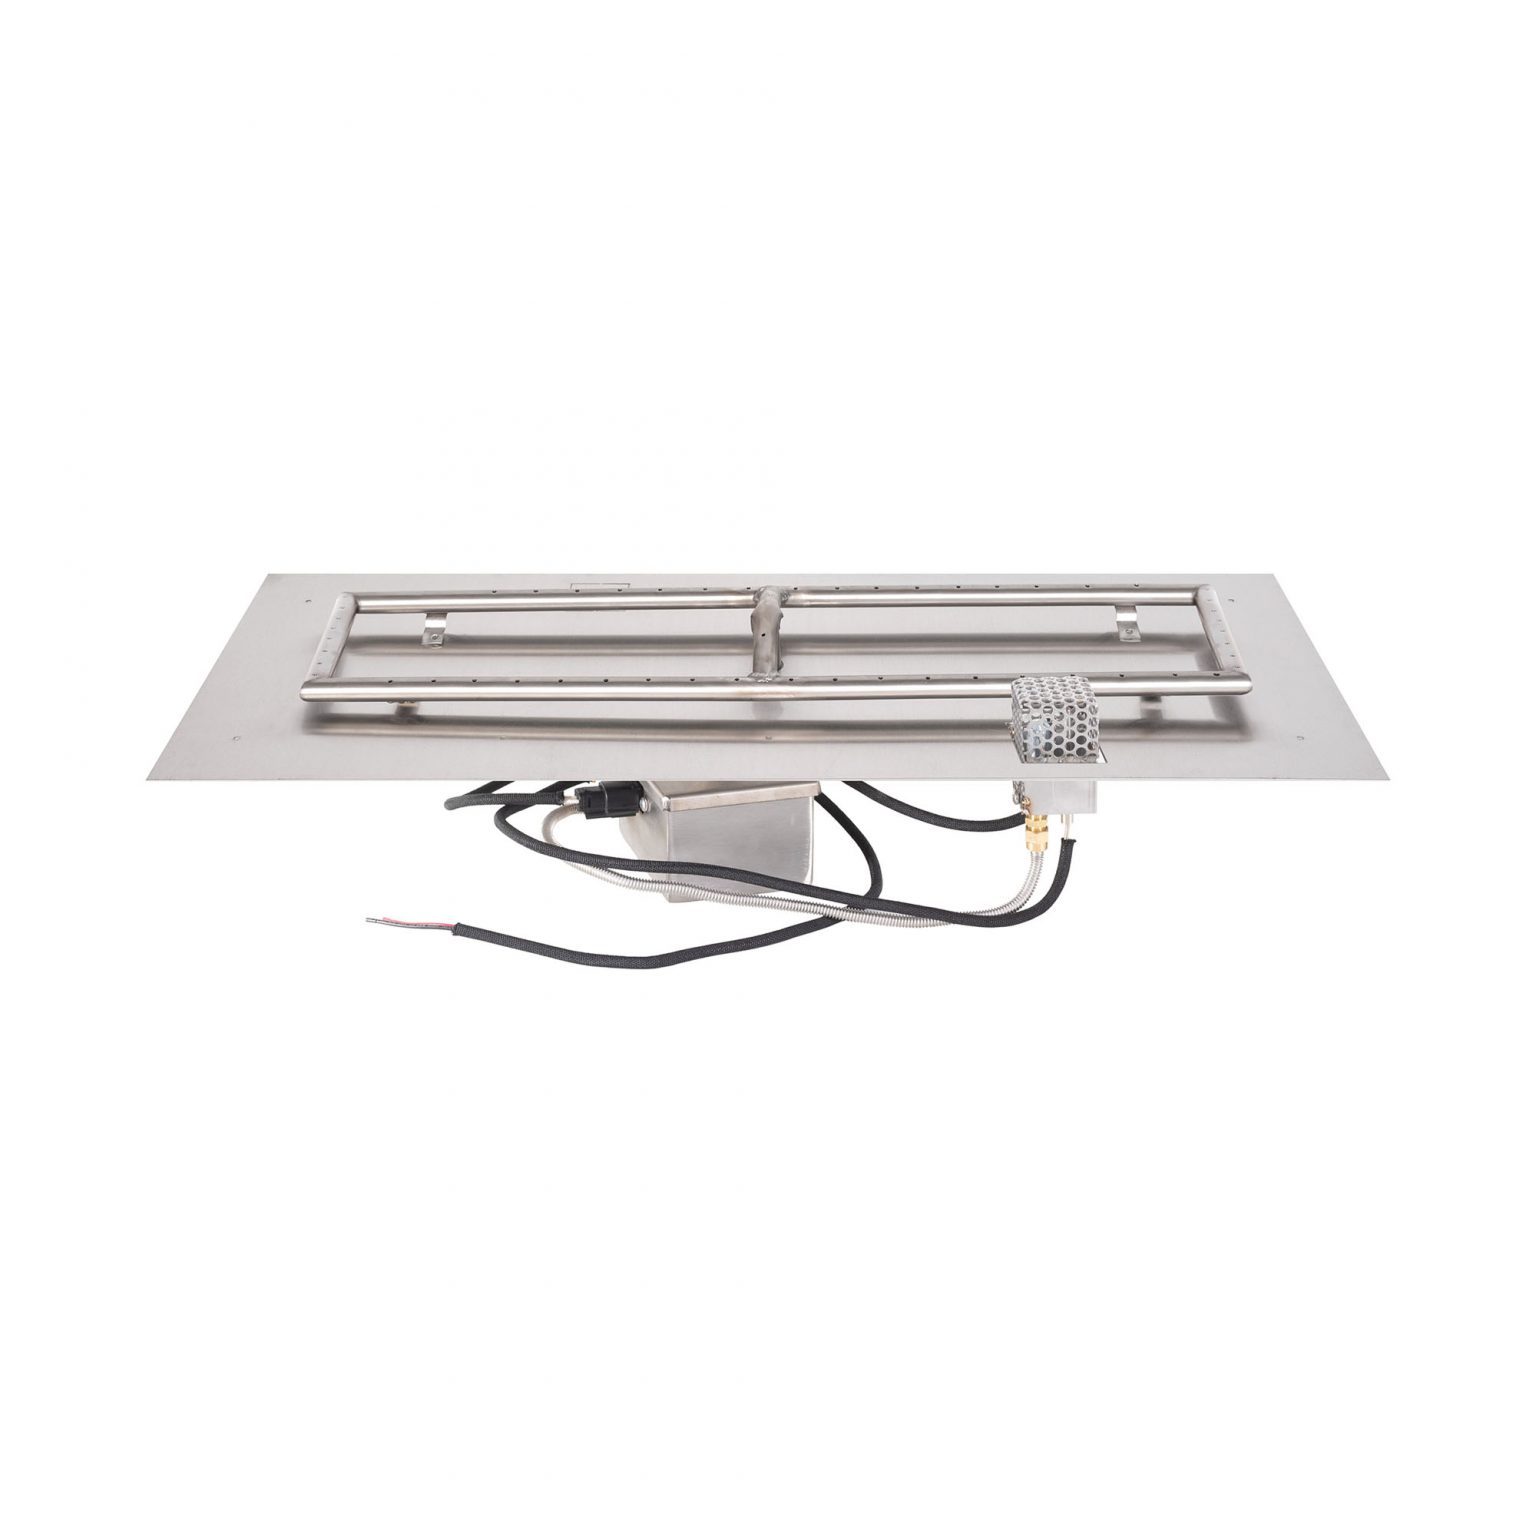 TOP Fires Rectangular Flat Pan & SS "H" Burner with Electronic Ignition Kit by The Outdoor Plus - Majestic Fountains